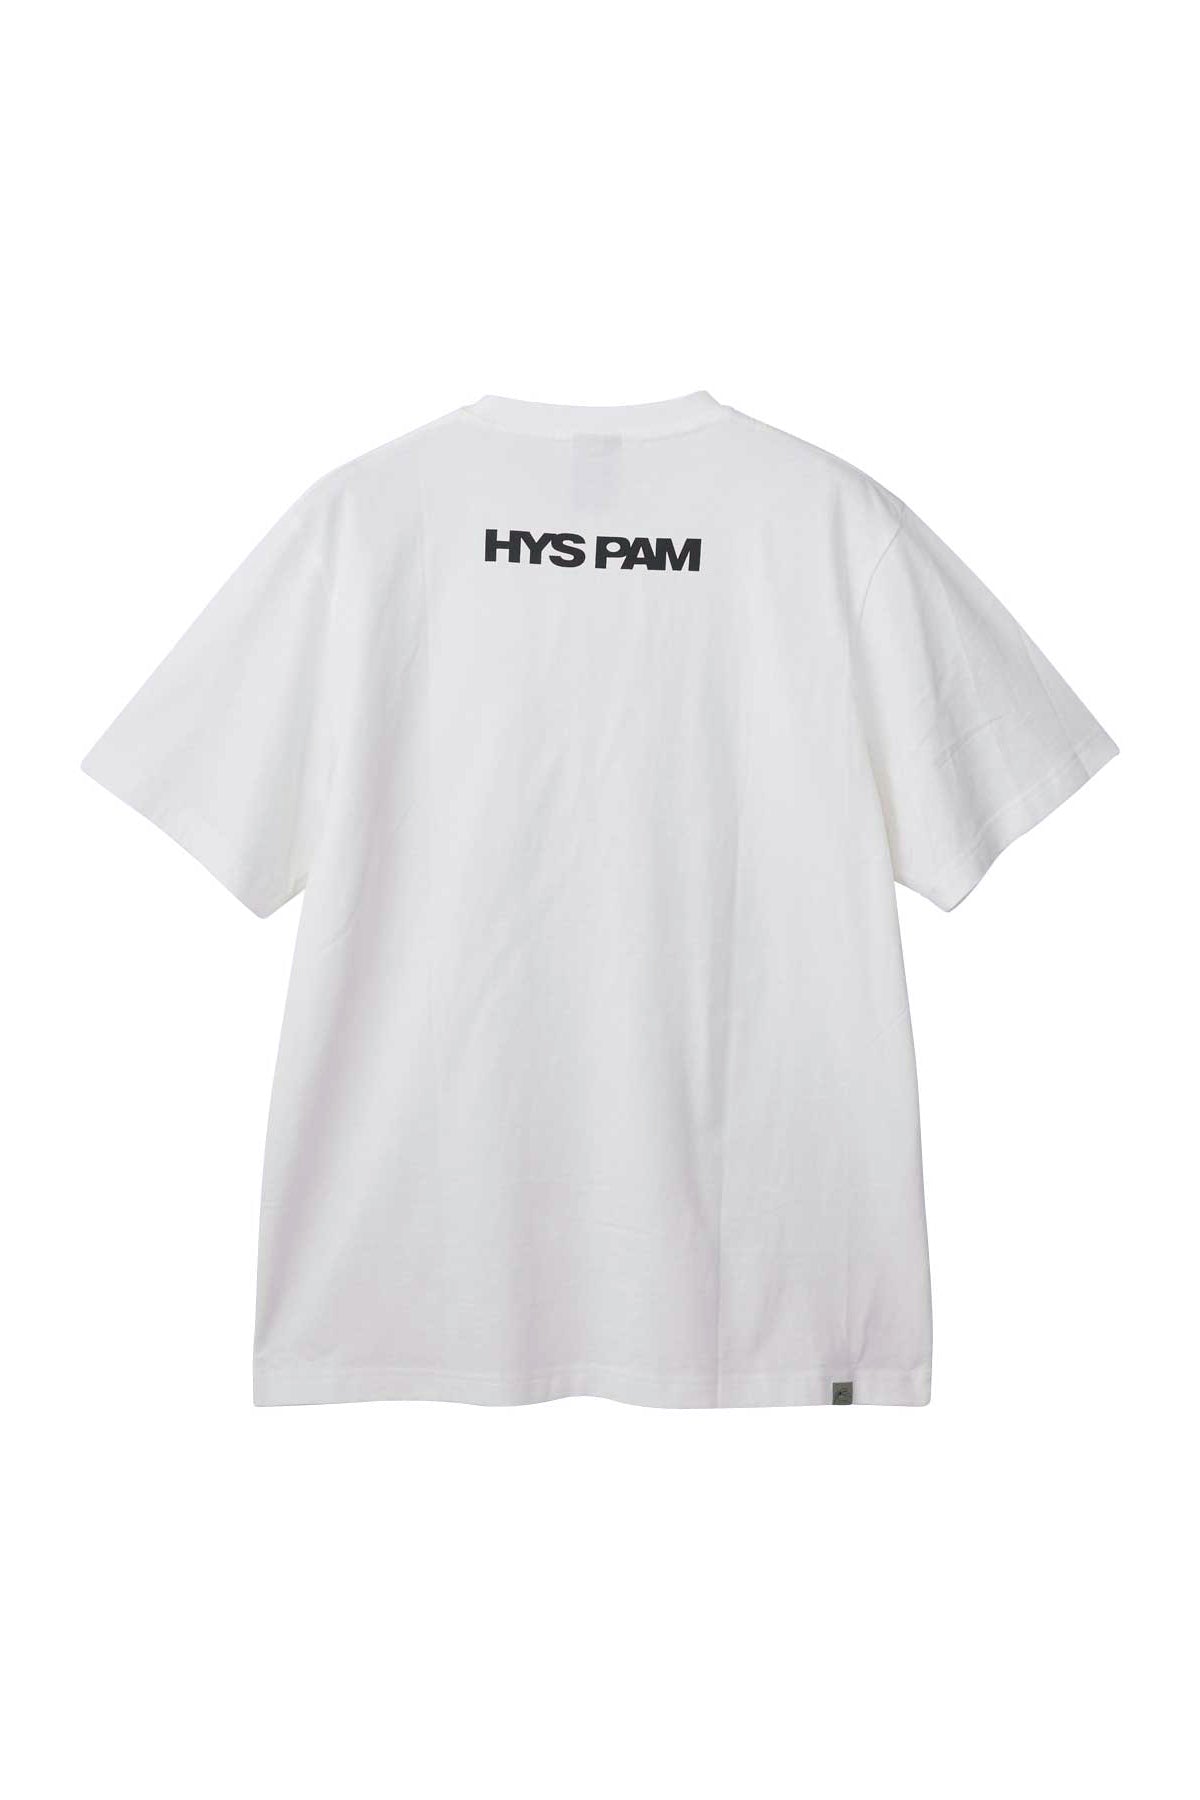 The PAM X HYSTERIC GLAMOUR - MARPI HUG SS TEE  available online with global shipping, and in PAM Stores Melbourne and Sydney.